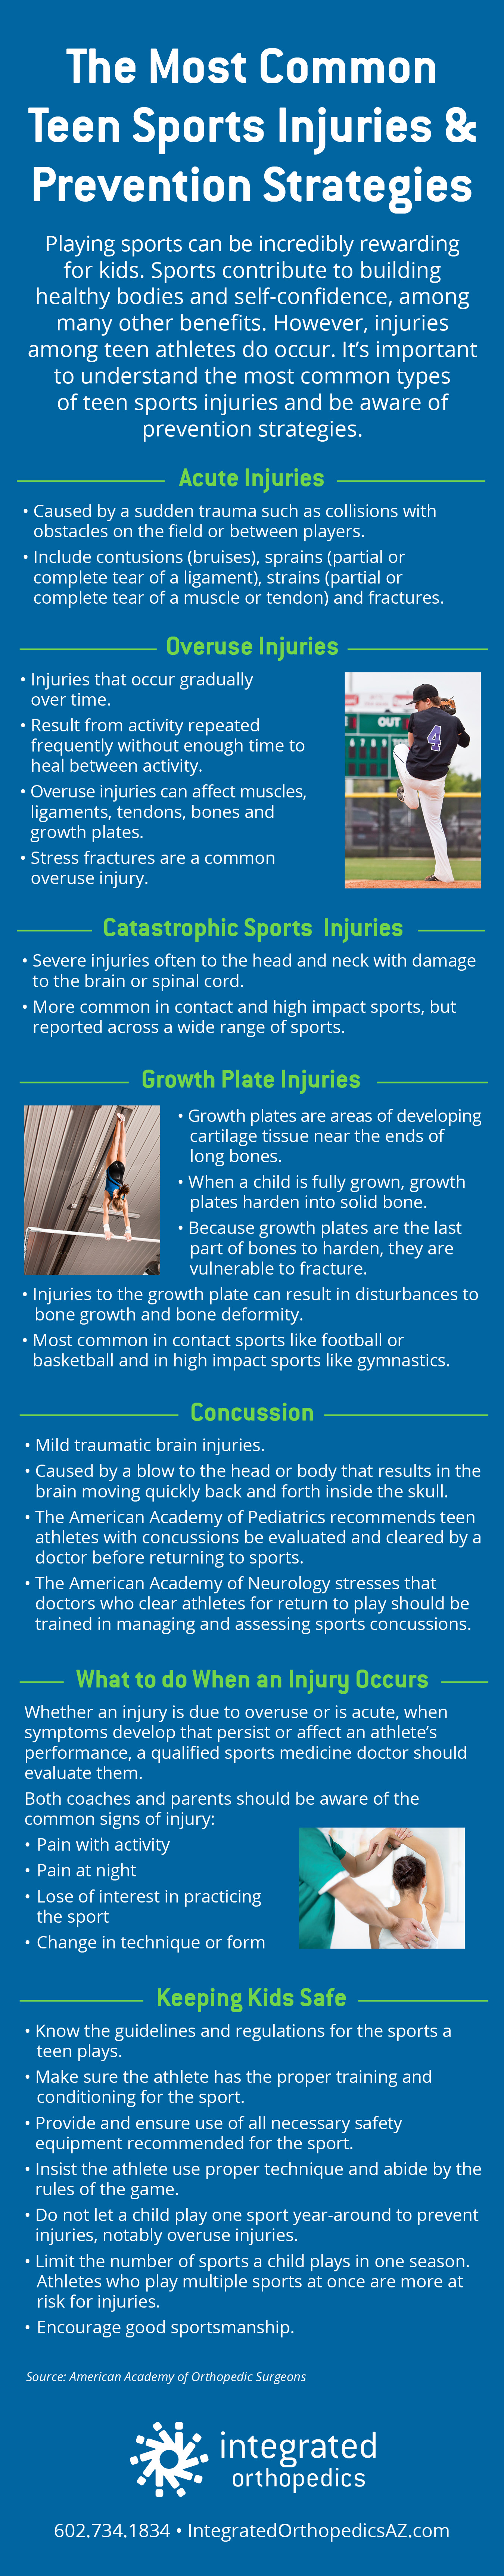 common teen sports injuries and prevention tips, integrated orthopedics